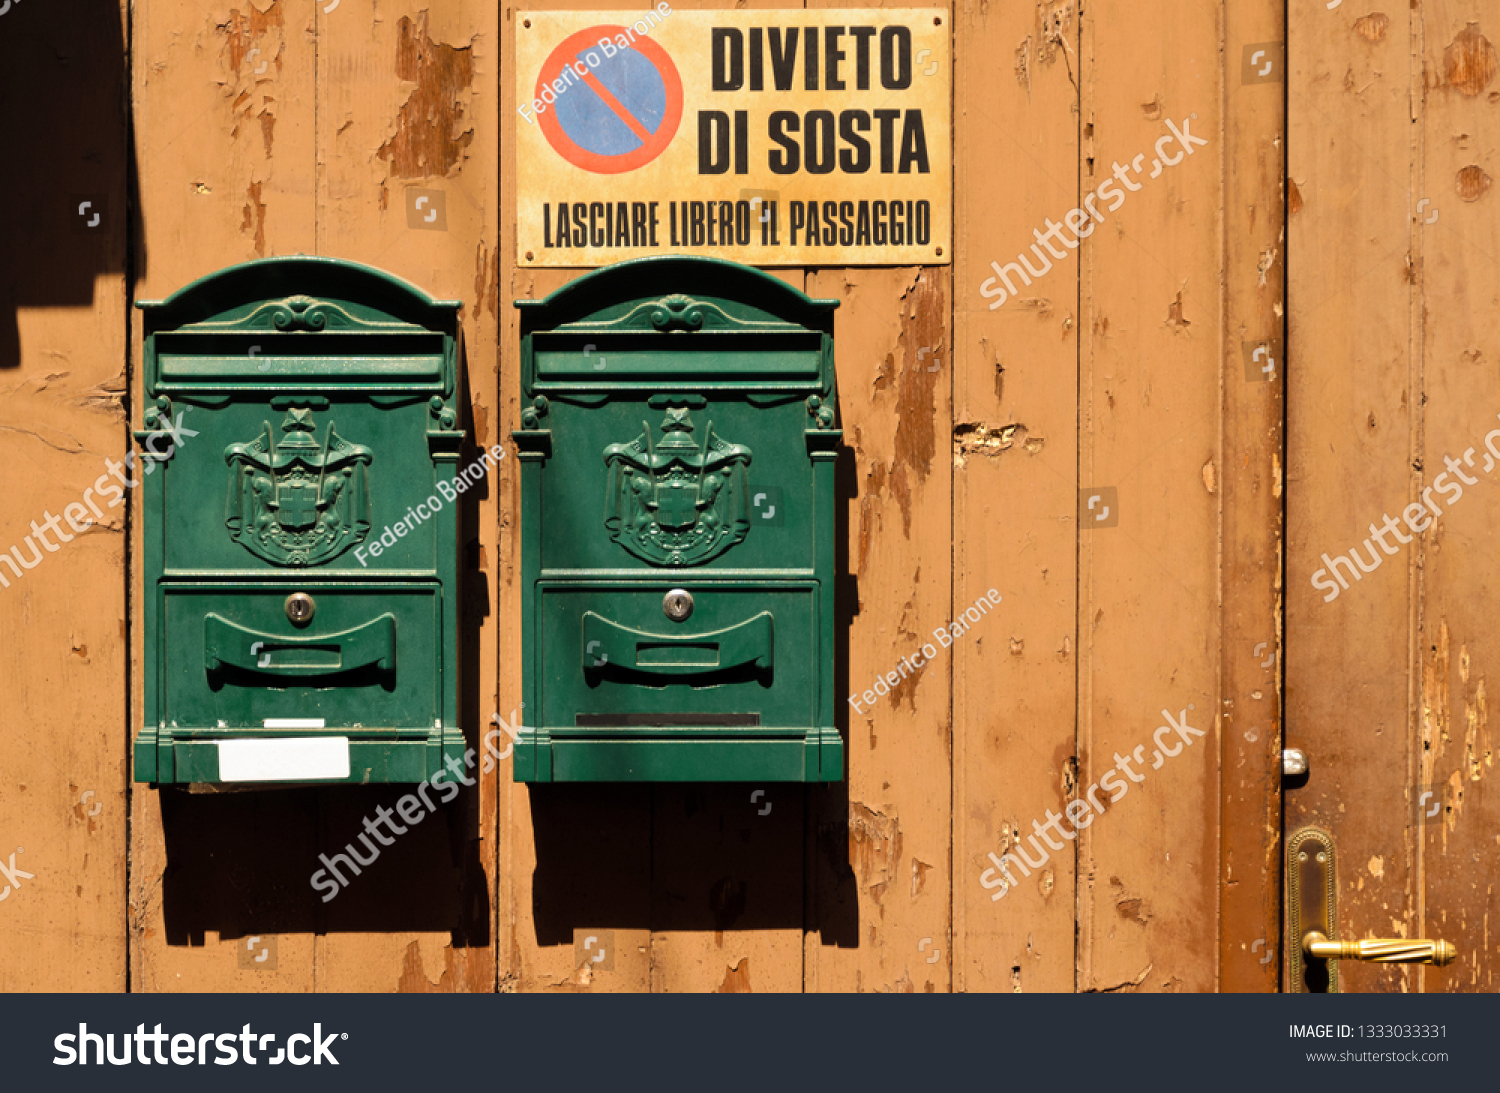 stock-photo-two-green-mailboxes-on-a-woo